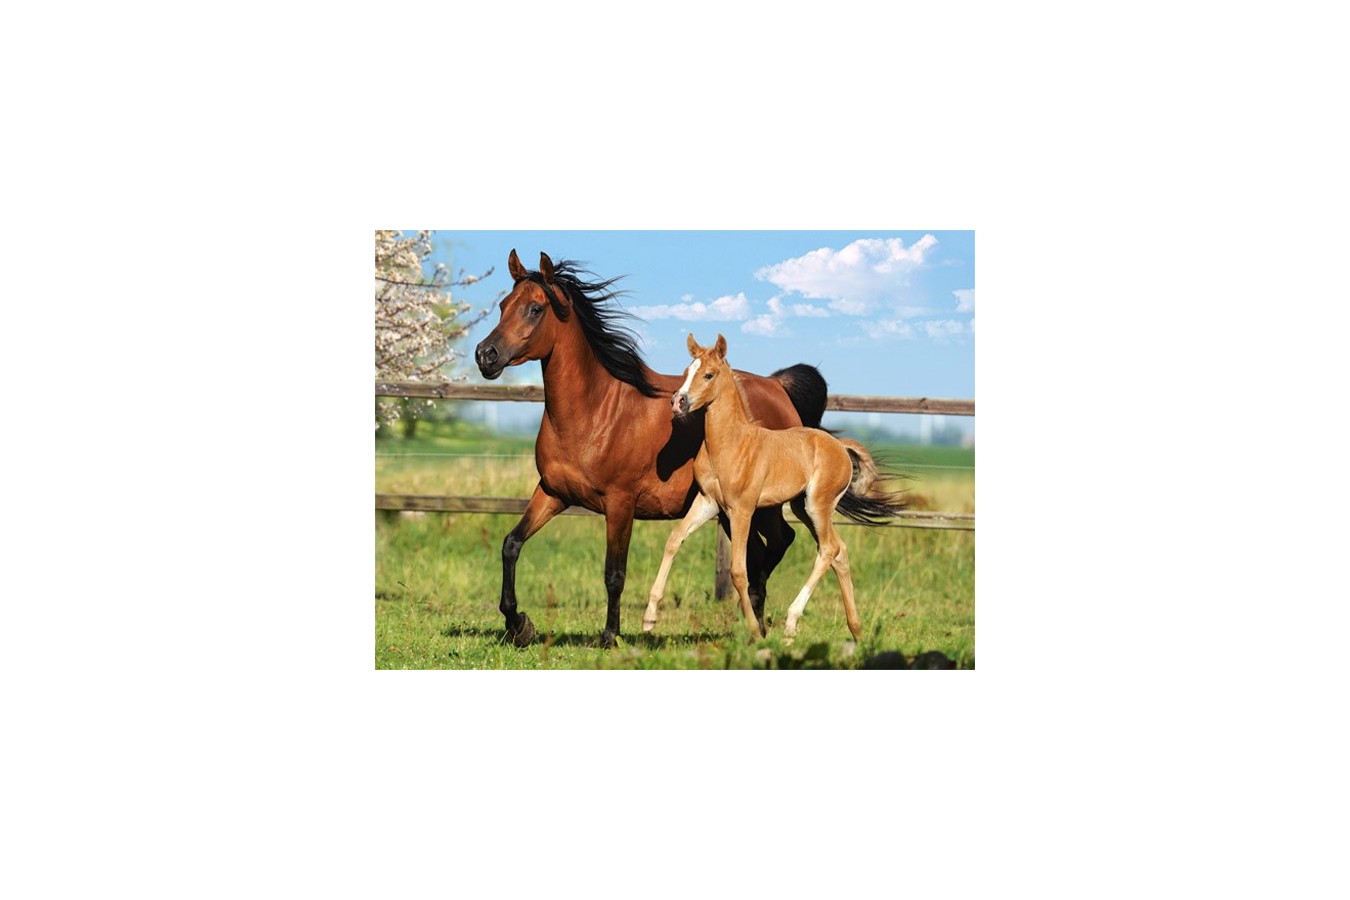 Puzzle Castorland - Mare And Foal, 260 Piese